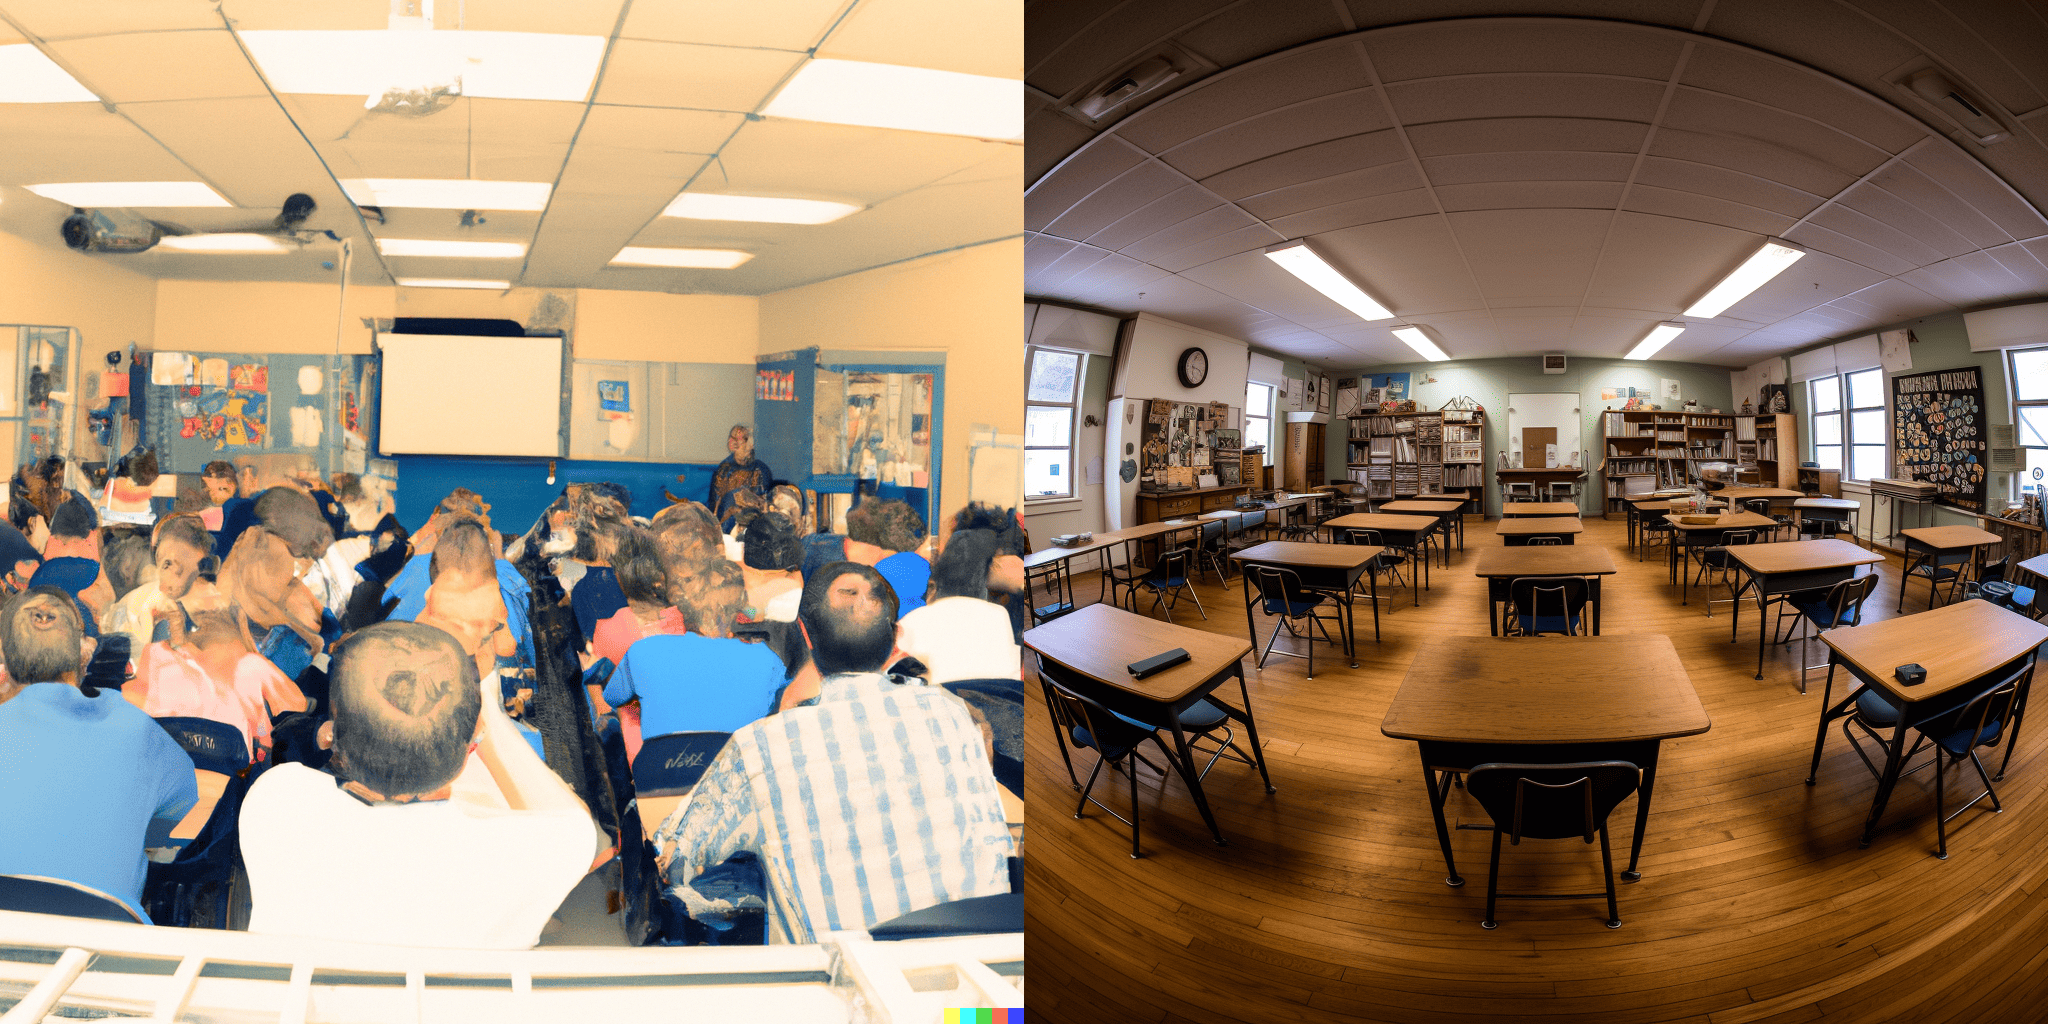 DALL-E 2 vs. Midjourney: Generated image comparison of a classroom full of students.